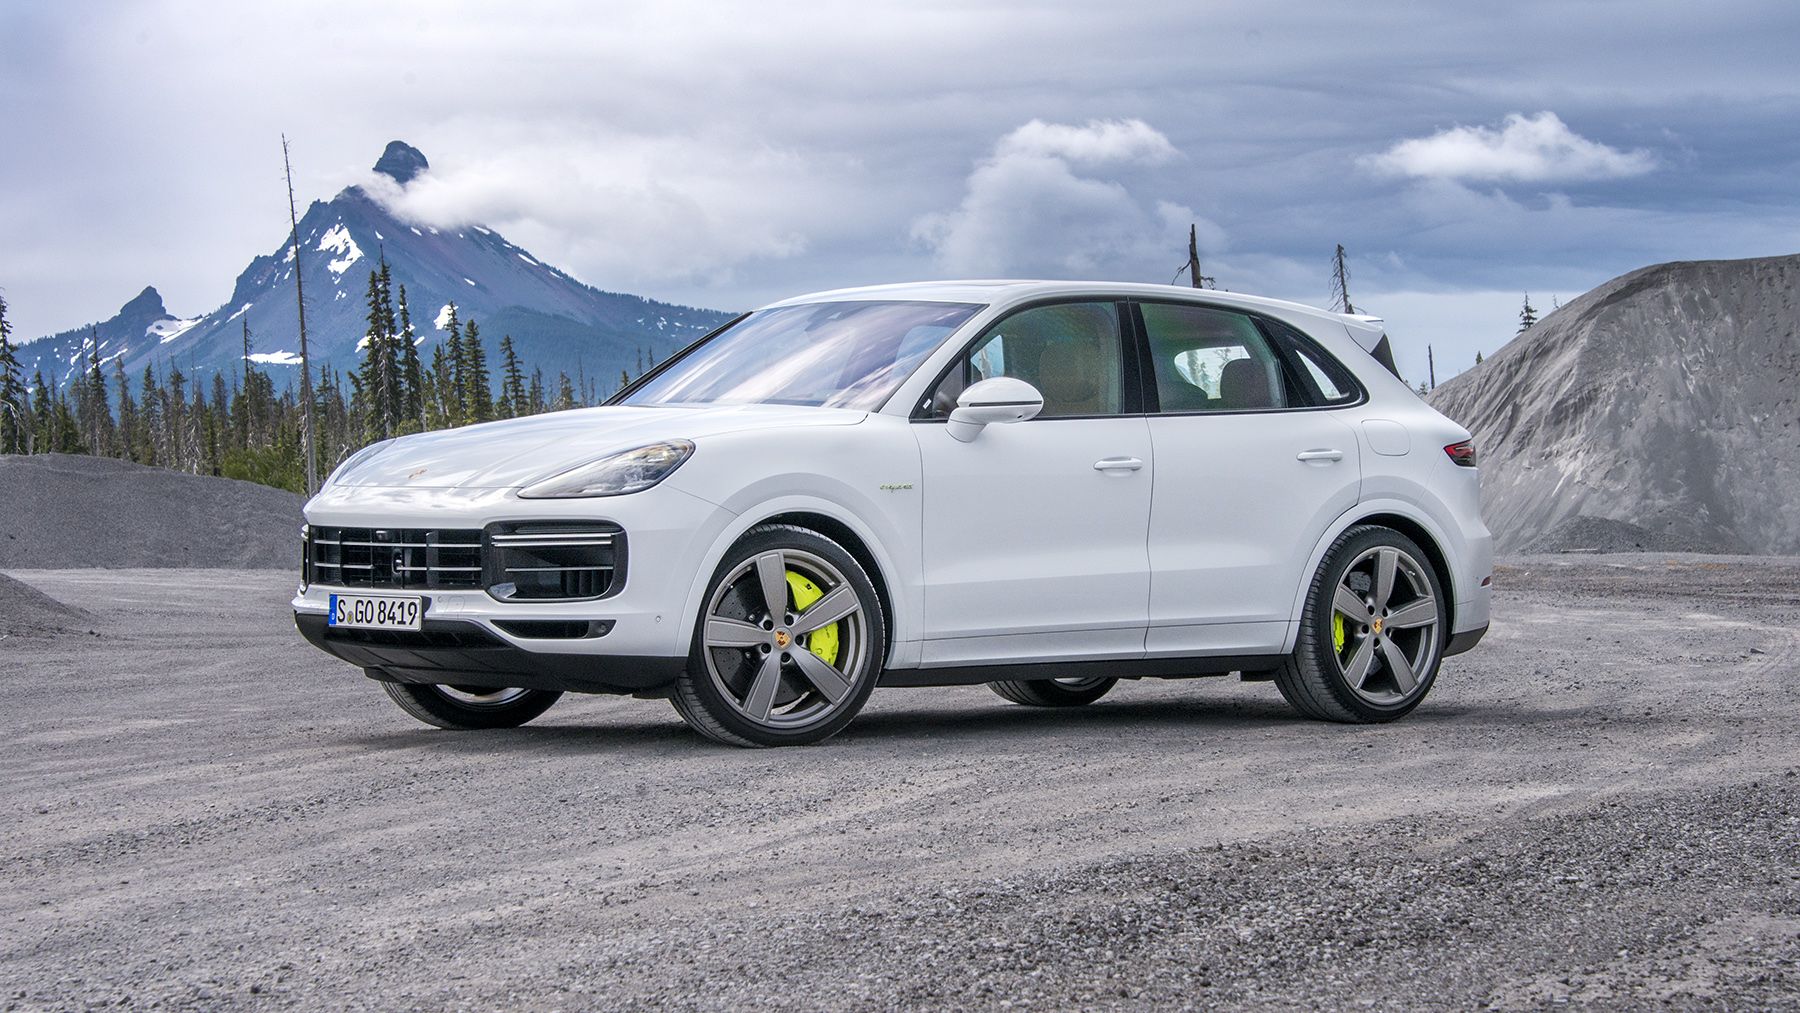 Vijandig Reageer Demonteer 2020 Porsche Cayenne Turbo S E-hybrid drive review, photos, specs,  performance and price